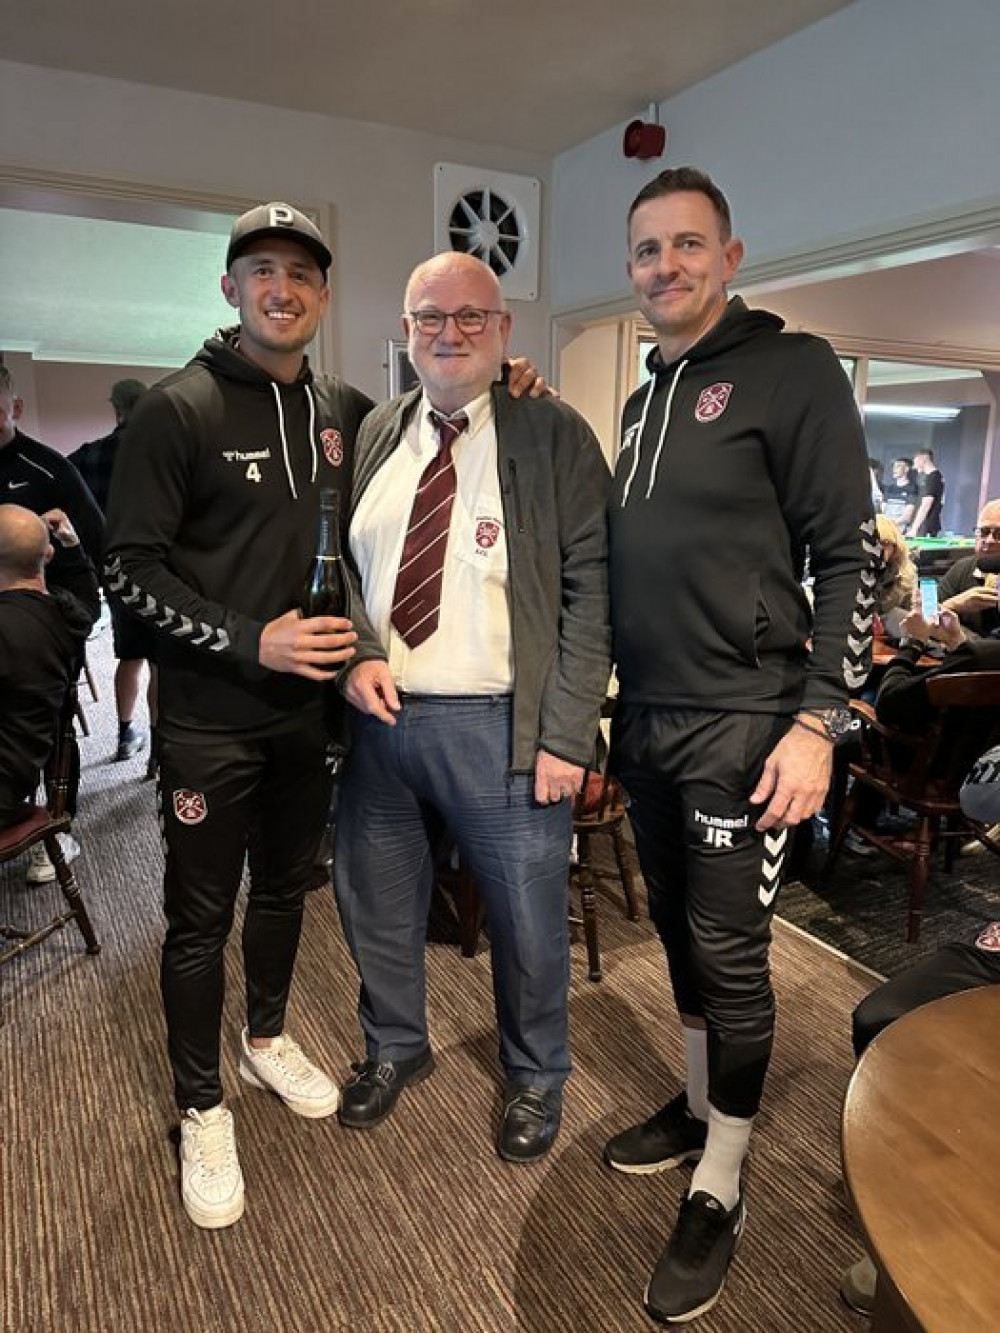 From the Paulton supporters site: Match Sponsor, Castello's, chose Martin Lenihan as the Man of the Match. He receives his award from Chairman David Bissex and Manager John Rendell.